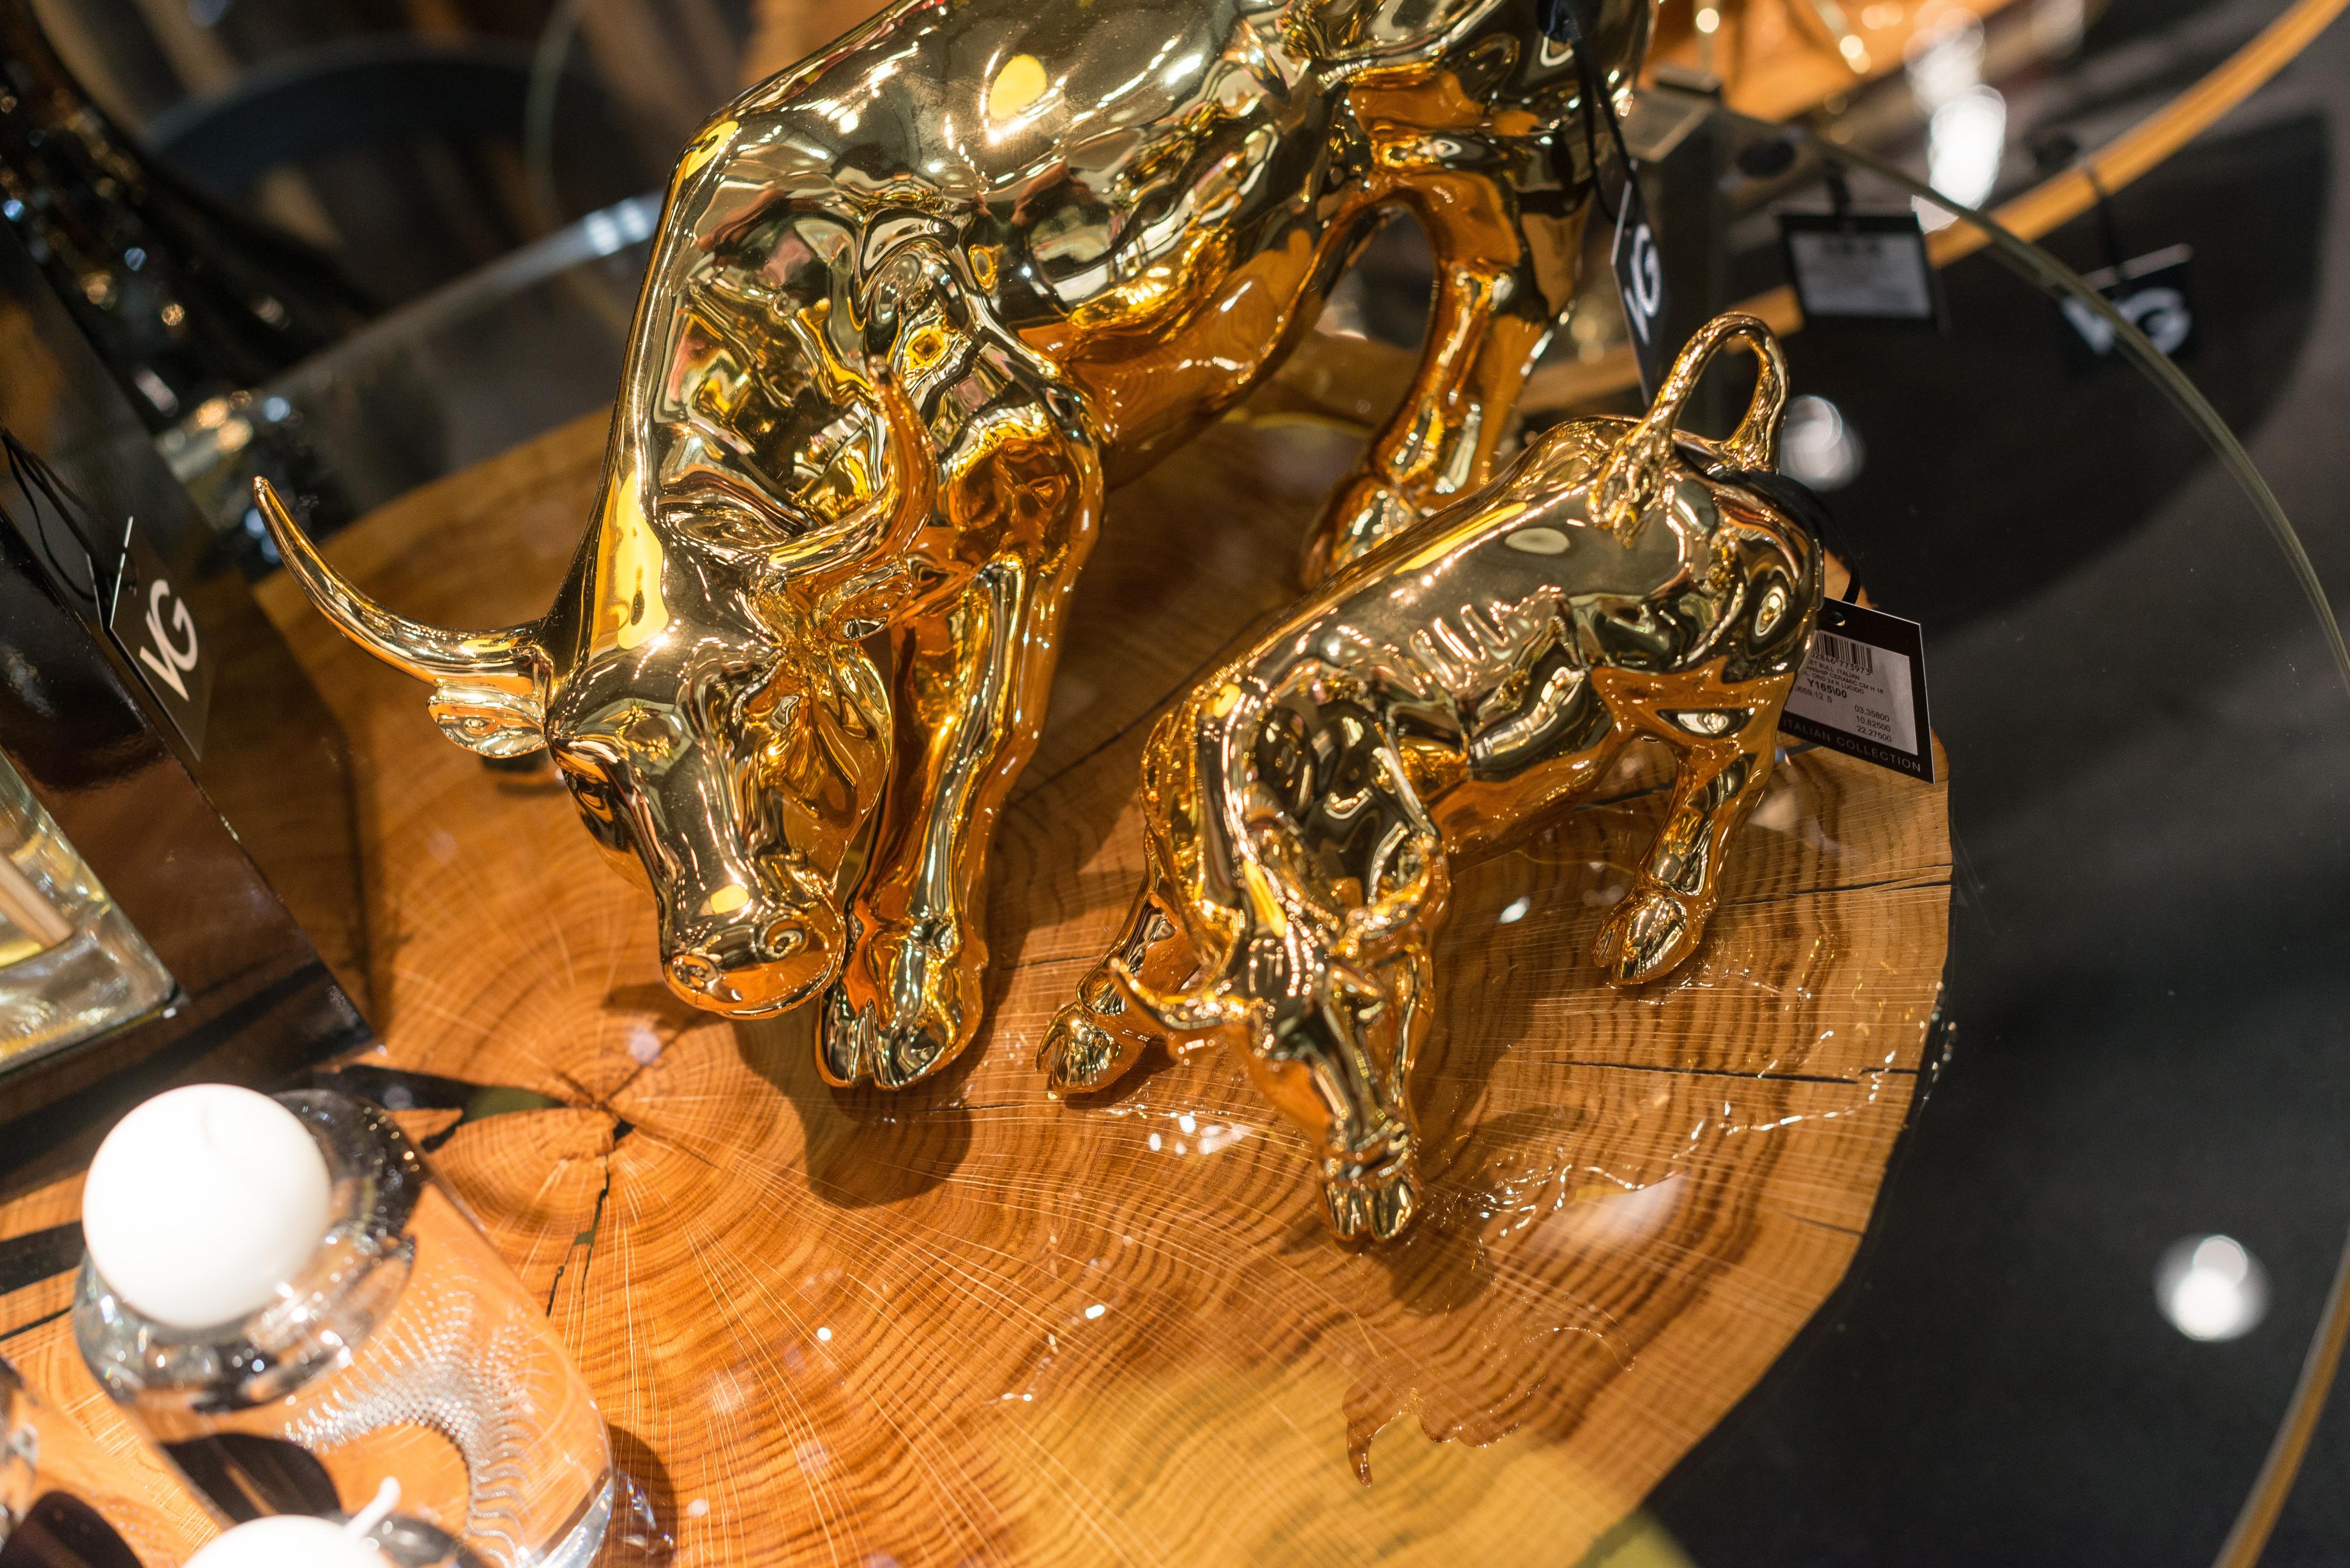 Hand-Crafted Wall Street Bull Small in Ceramic, Shiny Gold 24K, Italy For Sale